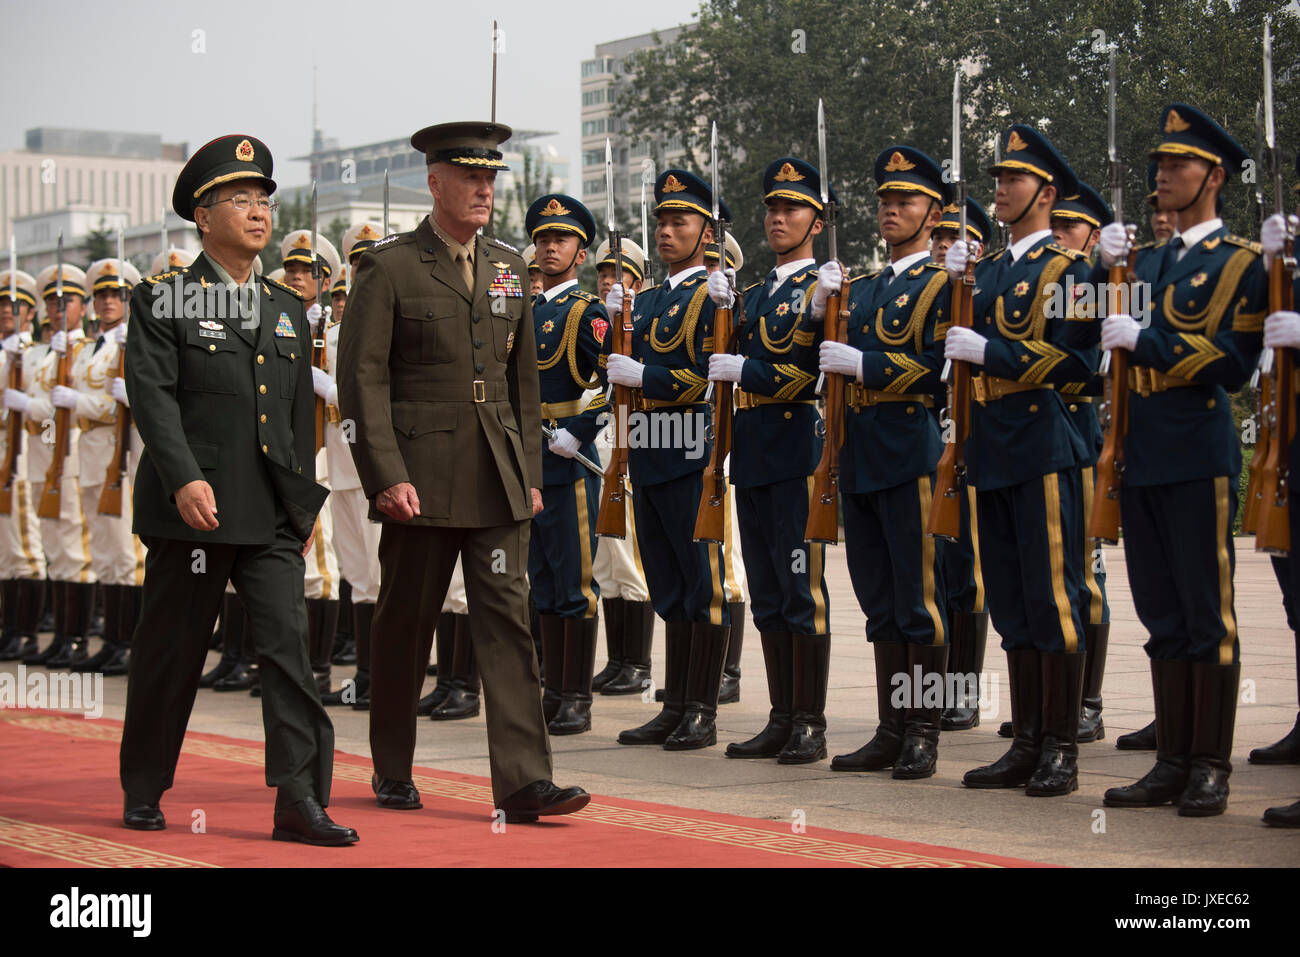 Beijing, China. 15th Aug, 2017. U.S. Chairman of the Joint Chiefs Gen. Joseph Dunford, right, reviews the honor guard during a red carpet arrival ceremony with his Chinese counterpart Chinese People's Liberation Army Gen. Fang Fenghui at the Bayi building August 15, 2017 in Beijing, China. Dunford and Fang signed an agreement to strengthen communication between the two militaries amid tensions concerning North Korea. Credit: Planetpix/Alamy Live News Stock Photo